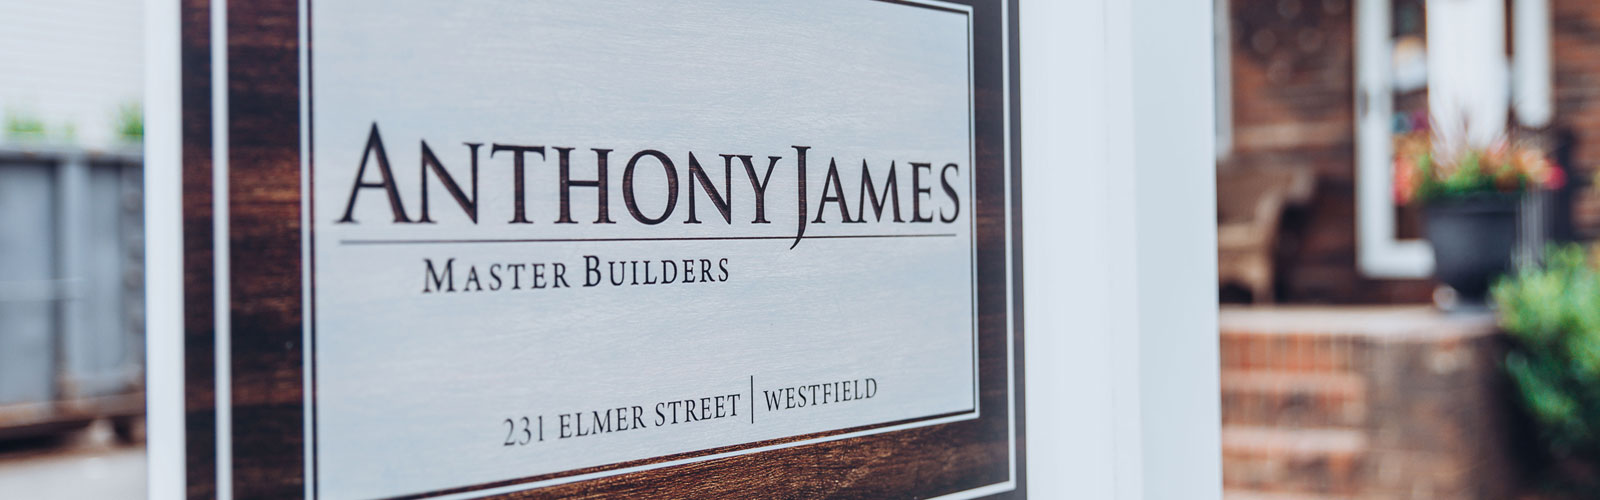 Anthony James Master Builders